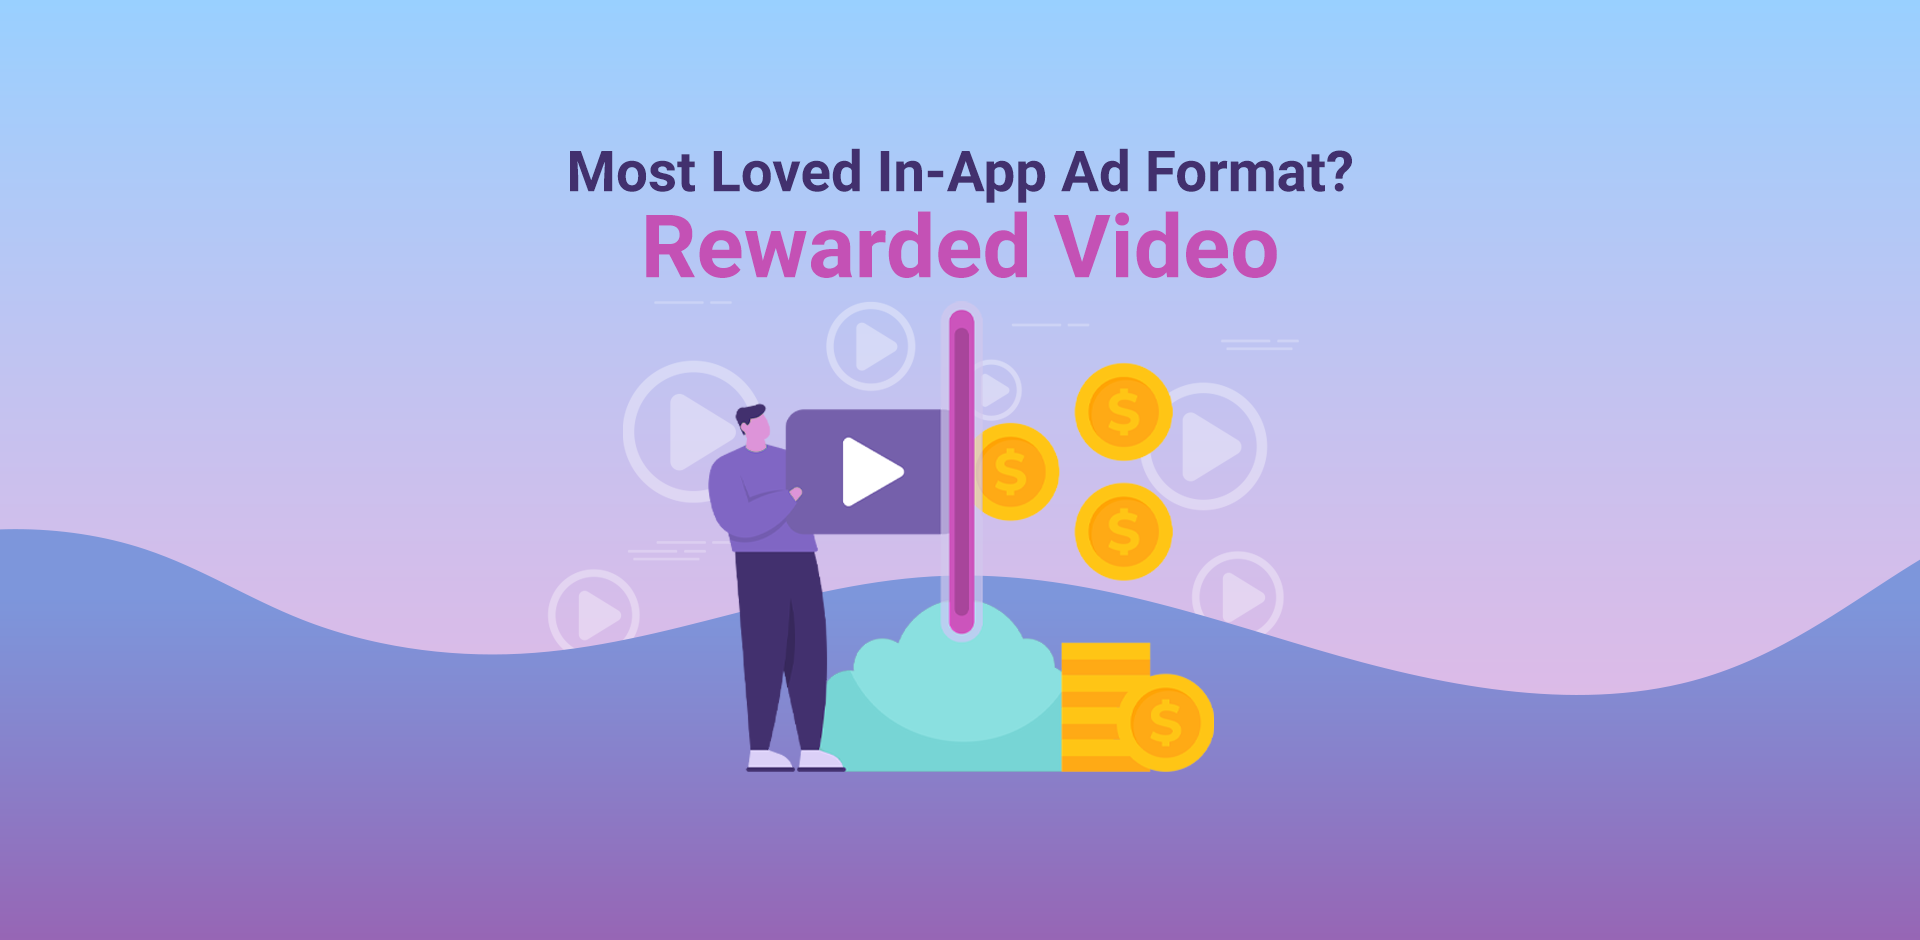 Most Loved In-App Ad Format? Rewarded Video